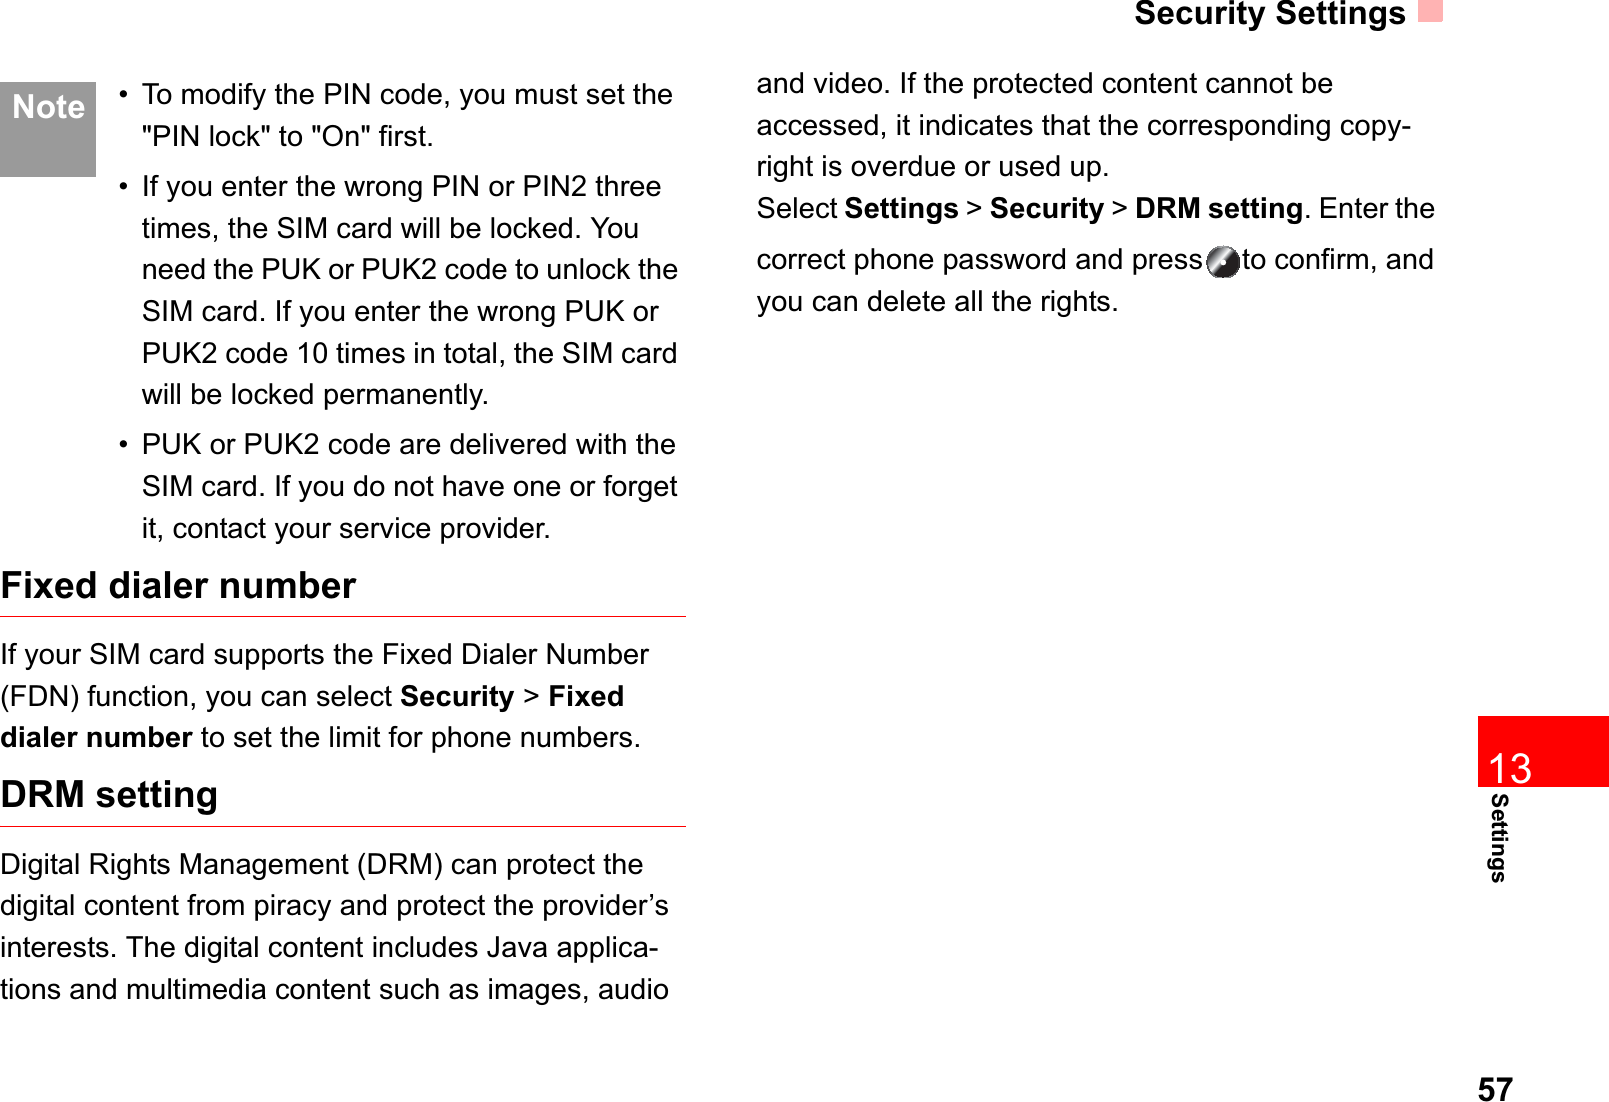 Security Settings57Settings13 Note • To modify the PIN code, you must set the &quot;PIN lock&quot; to &quot;On&quot; first.• If you enter the wrong PIN or PIN2 three times, the SIM card will be locked. You need the PUK or PUK2 code to unlock the SIM card. If you enter the wrong PUK or PUK2 code 10 times in total, the SIM card will be locked permanently.• PUK or PUK2 code are delivered with the SIM card. If you do not have one or forget it, contact your service provider.Fixed dialer numberIf your SIM card supports the Fixed Dialer Number (FDN) function, you can select Security &gt;Fixed dialer number to set the limit for phone numbers.DRM settingDigital Rights Management (DRM) can protect the digital content from piracy and protect the provider’s interests. The digital content includes Java applica-tions and multimedia content such as images, audio and video. If the protected content cannot be accessed, it indicates that the corresponding copy-right is overdue or used up. Select Settings &gt; Security &gt; DRM setting. Enter the correct phone password and press to confirm, and you can delete all the rights. 